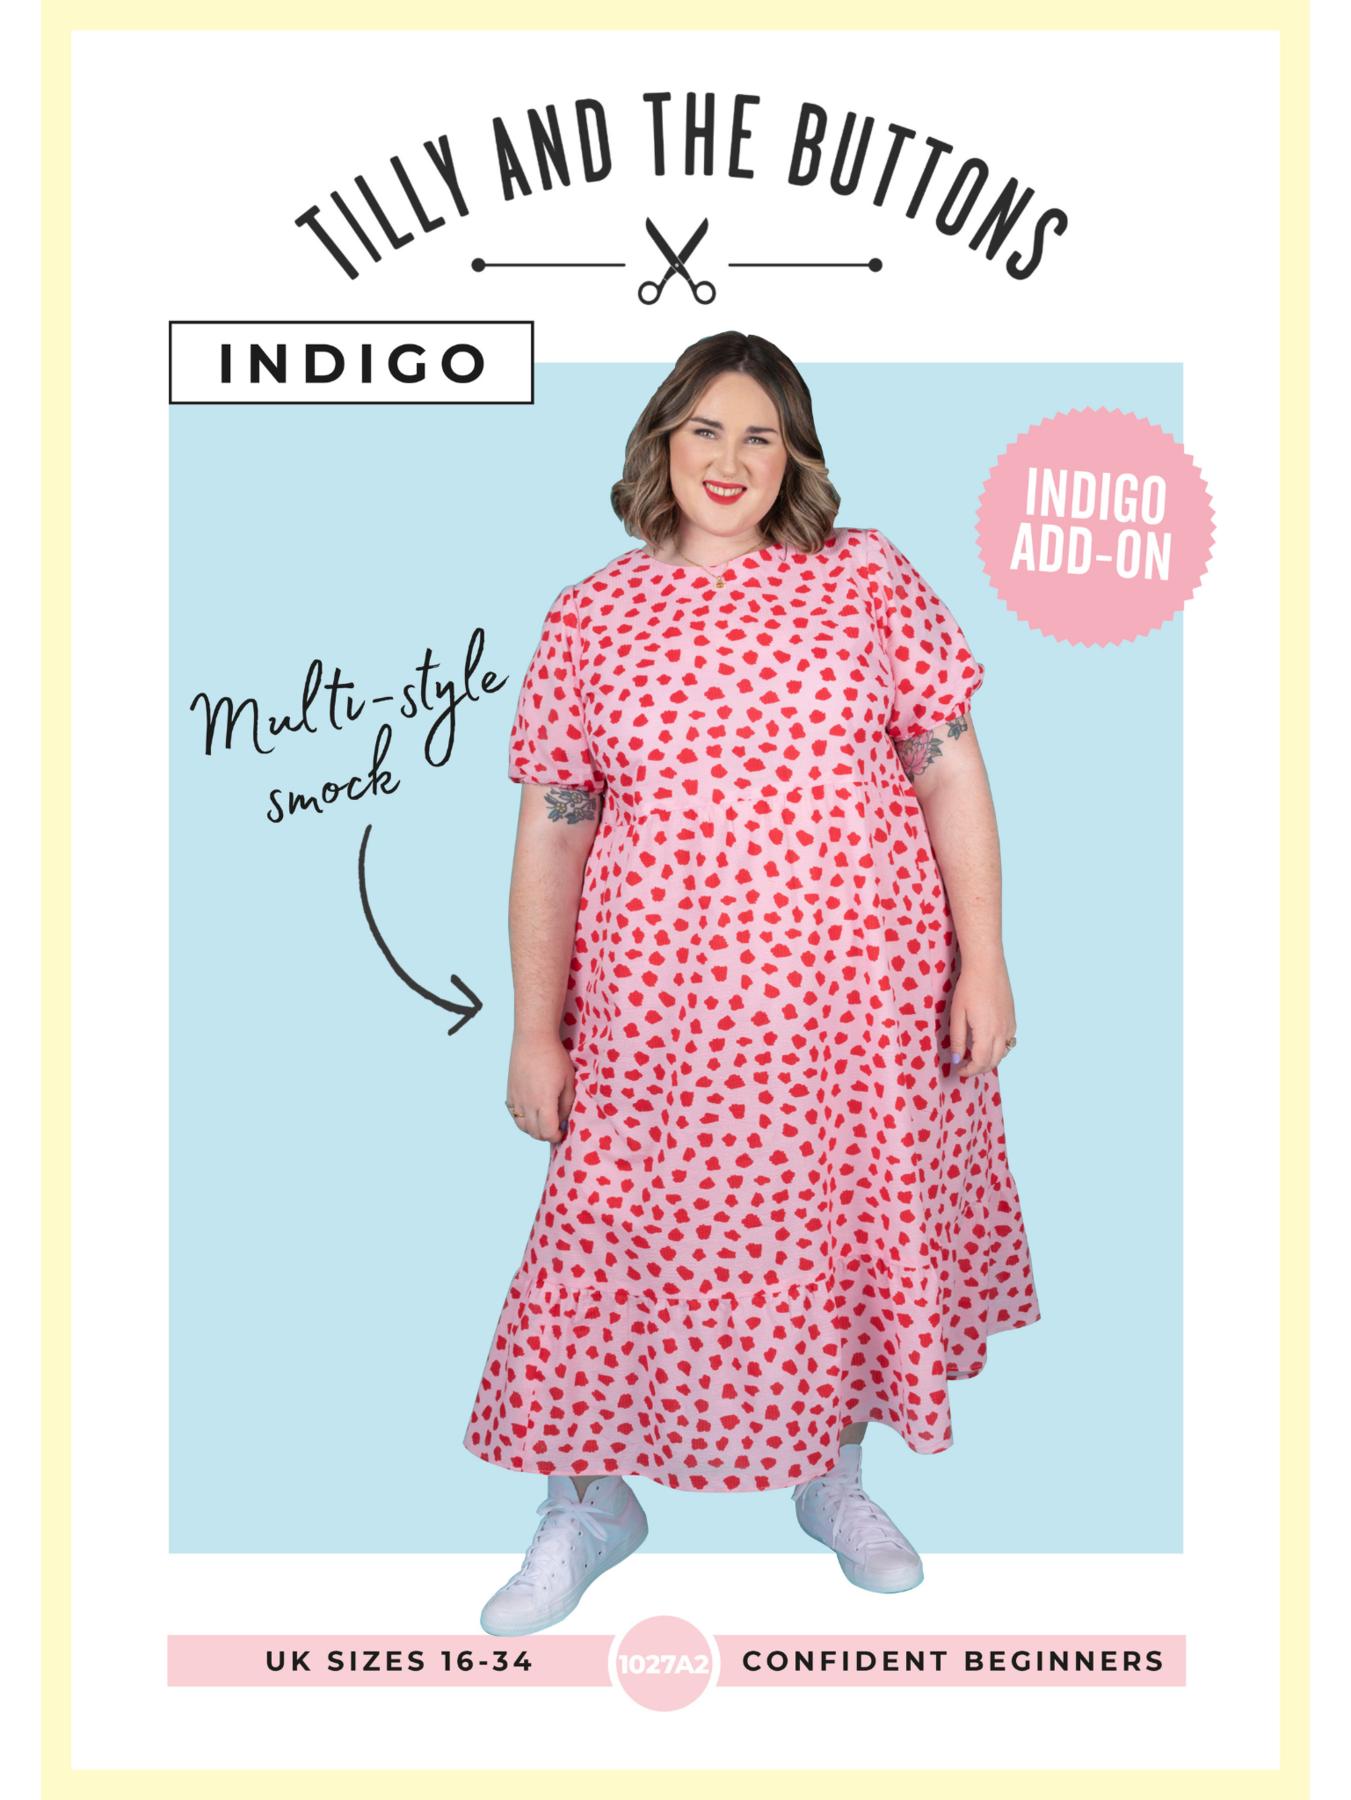 Tilly and the Buttons Indigo Top/Dress Add-on